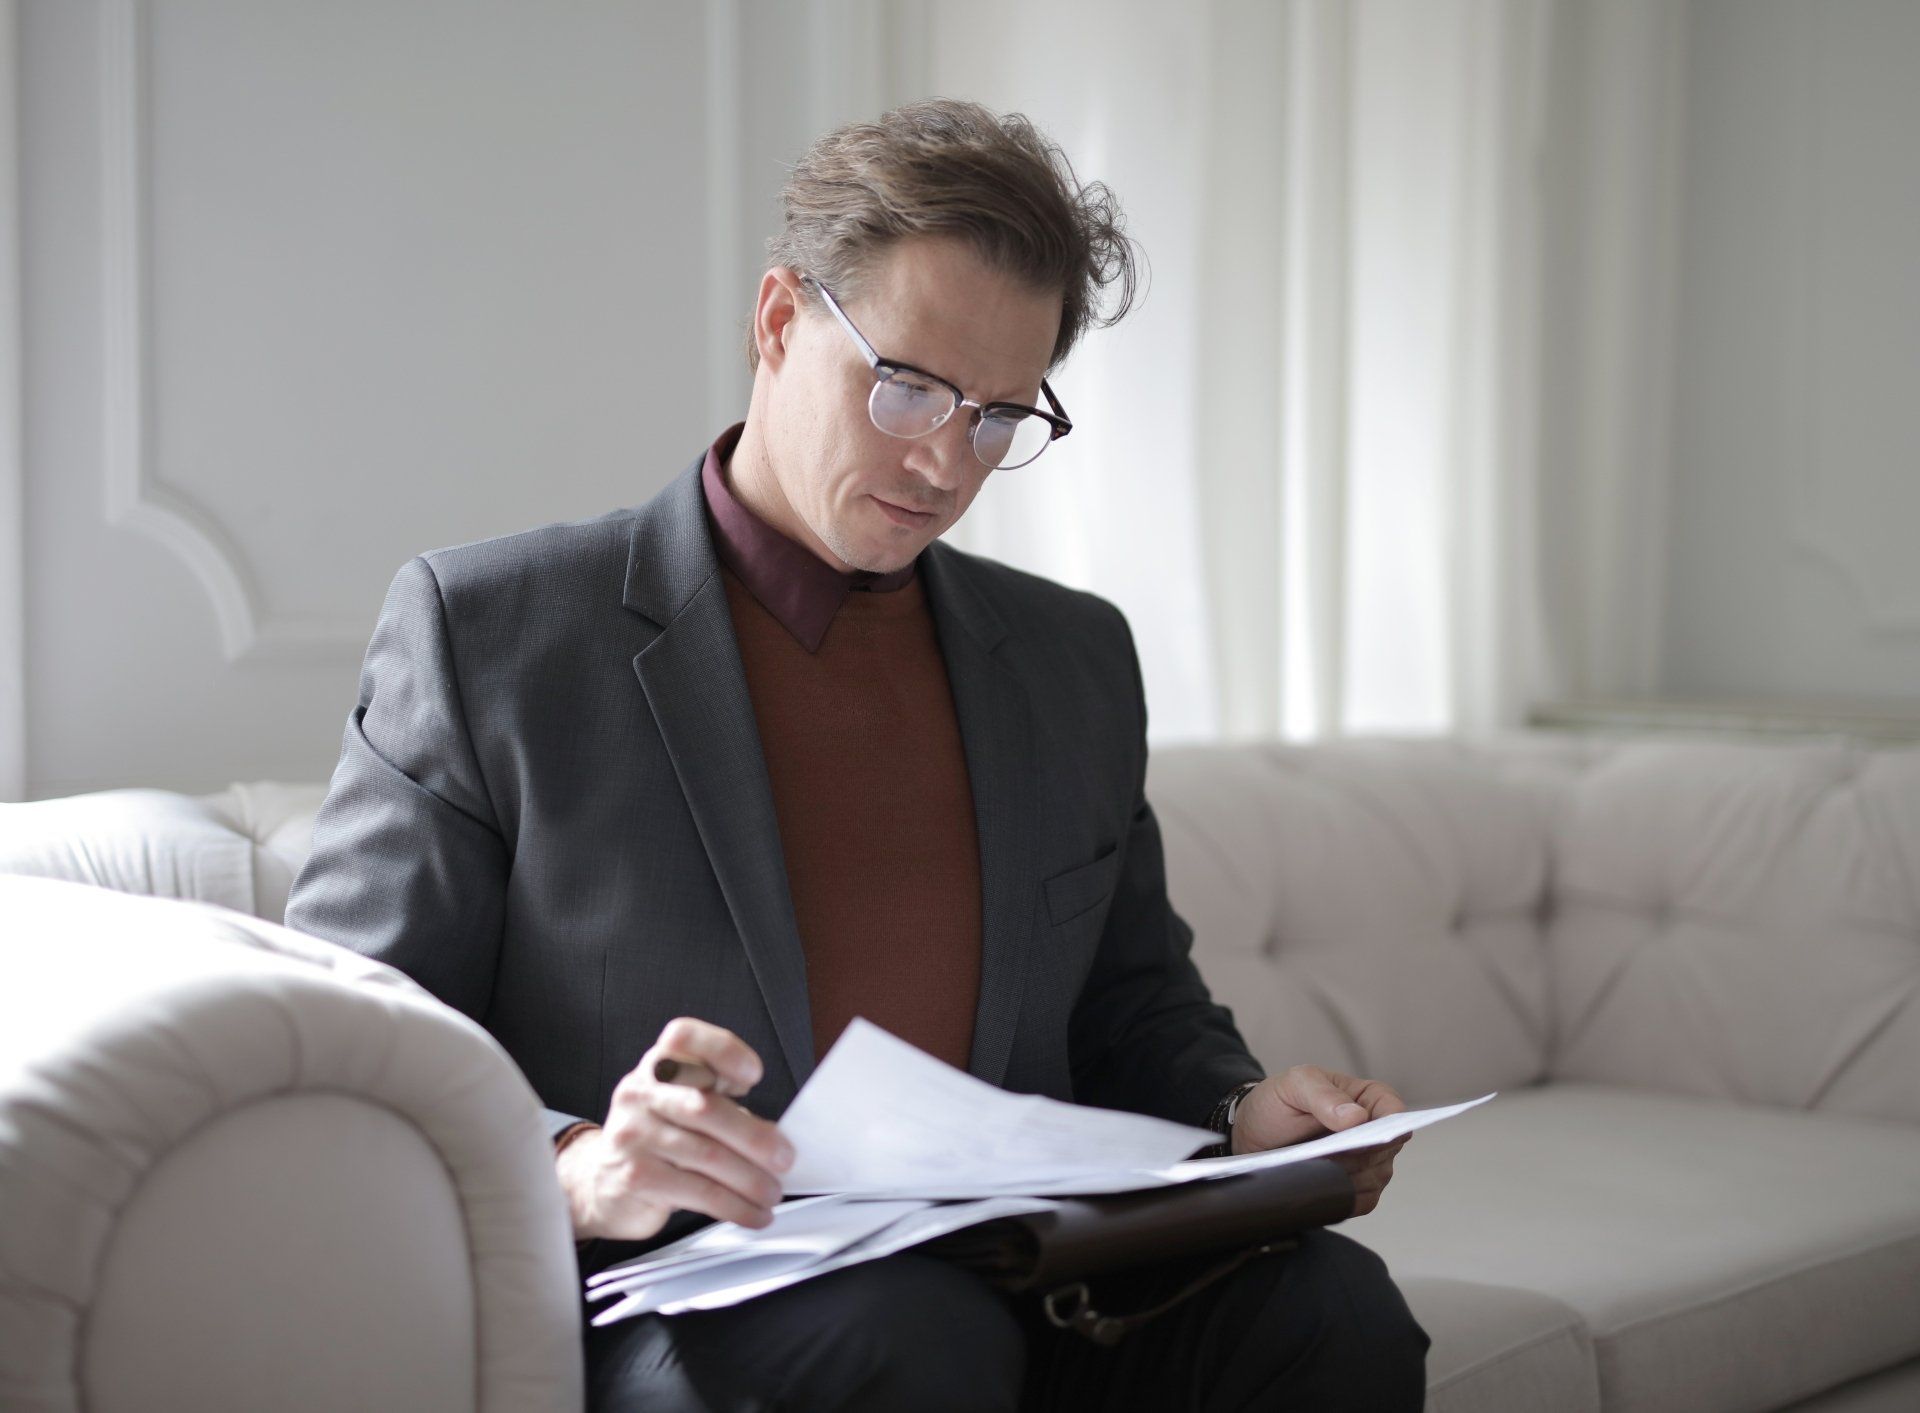 a man in a suit and glasses is sitting on a couch looking at papers .